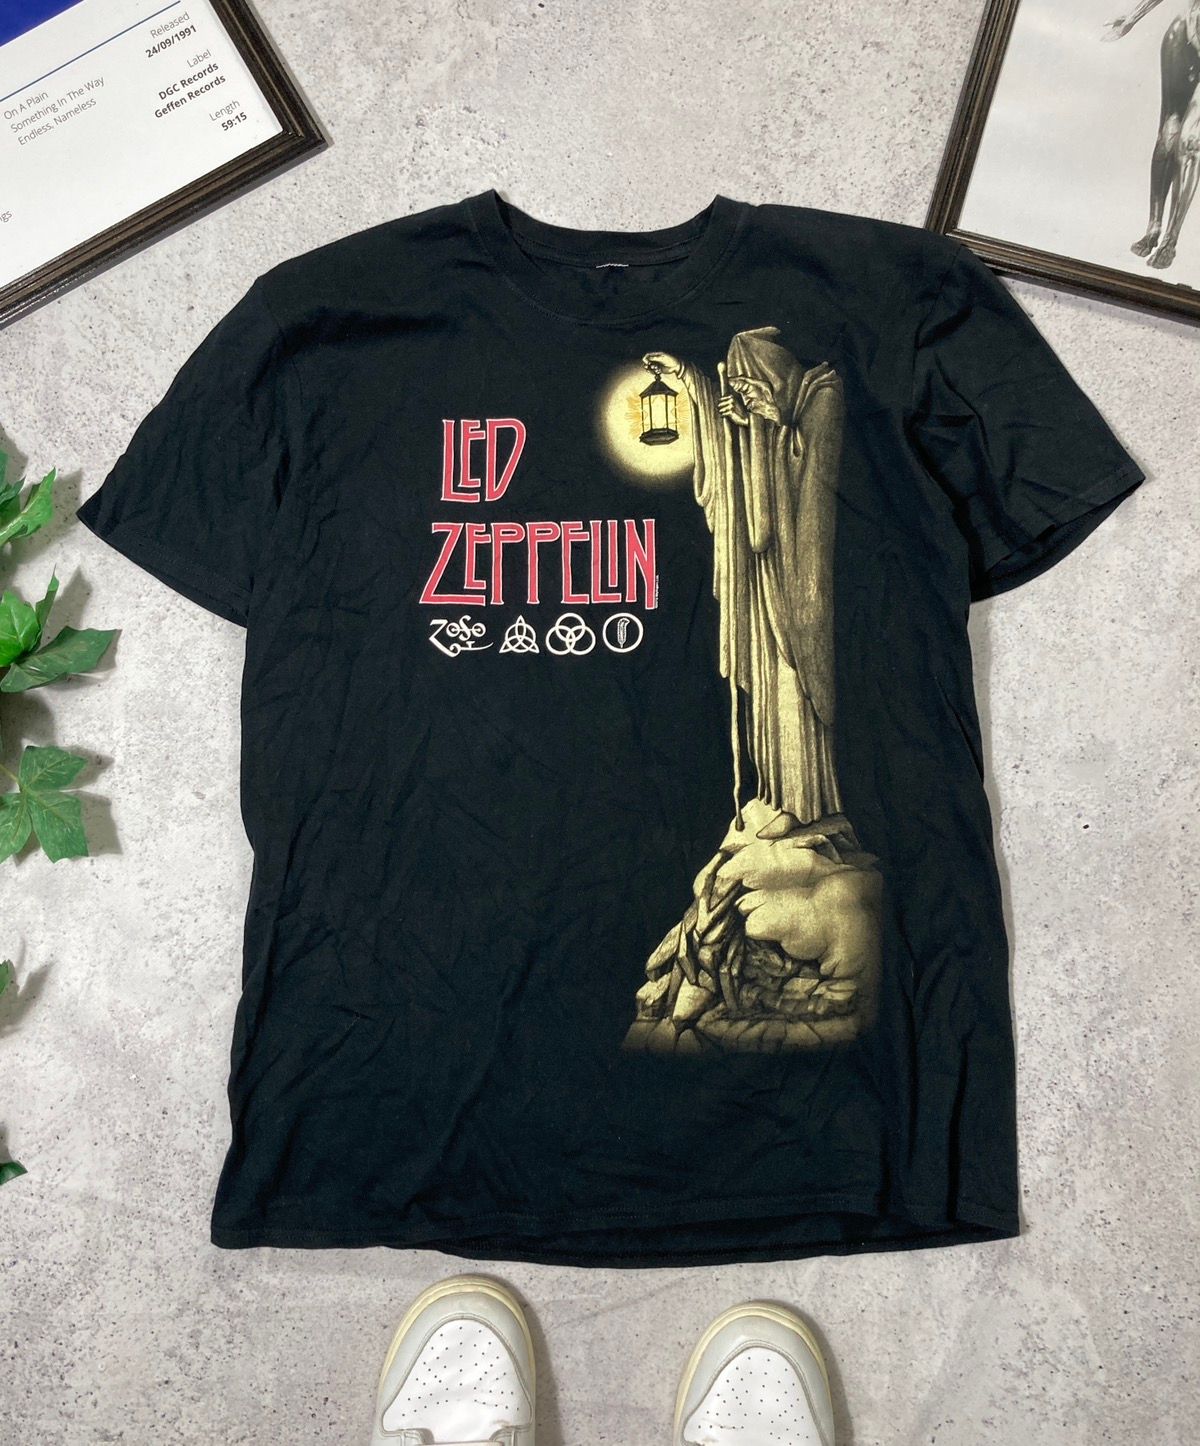 Pre-owned Band Tees X Led Zeppelin Vintage 2012 T-shirt In Black